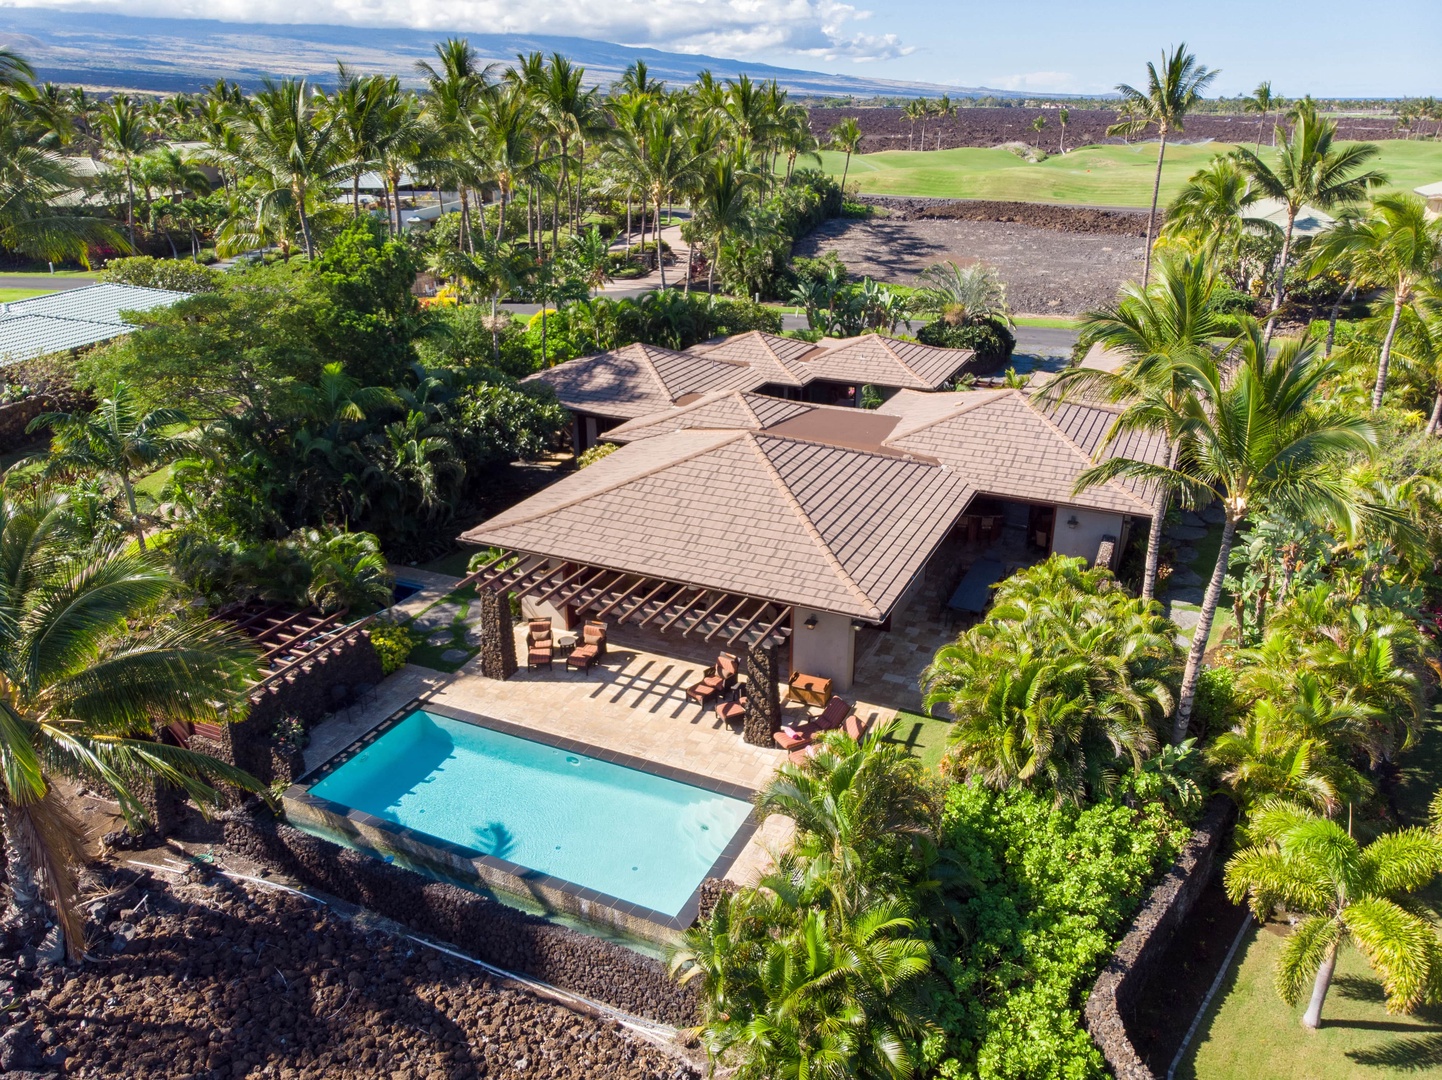 Kamuela Vacation Rentals, House of the Turtle at Champion Ridge, Mauna Lani (CR 18) - House of the Turtle at Champion Ridge